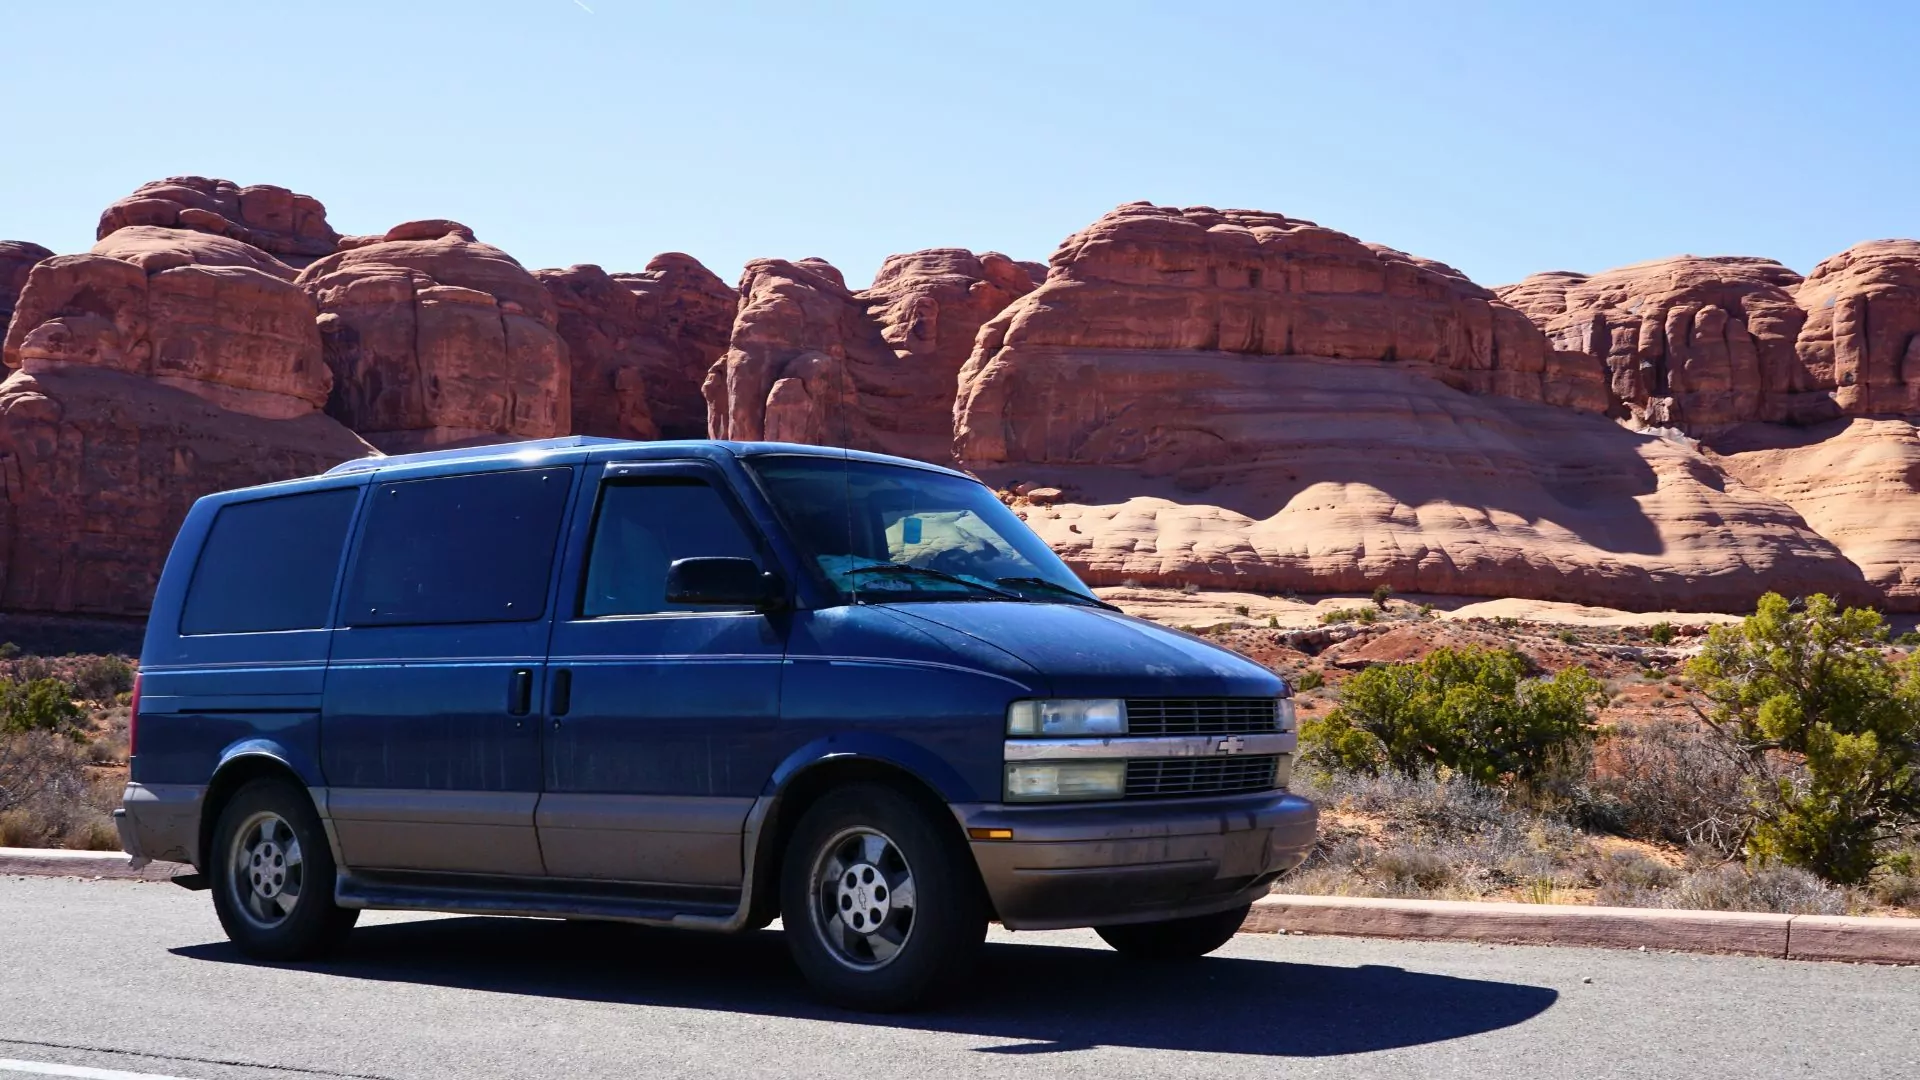 A Chevy Astrovan drives by red rock formations in the Utah desert